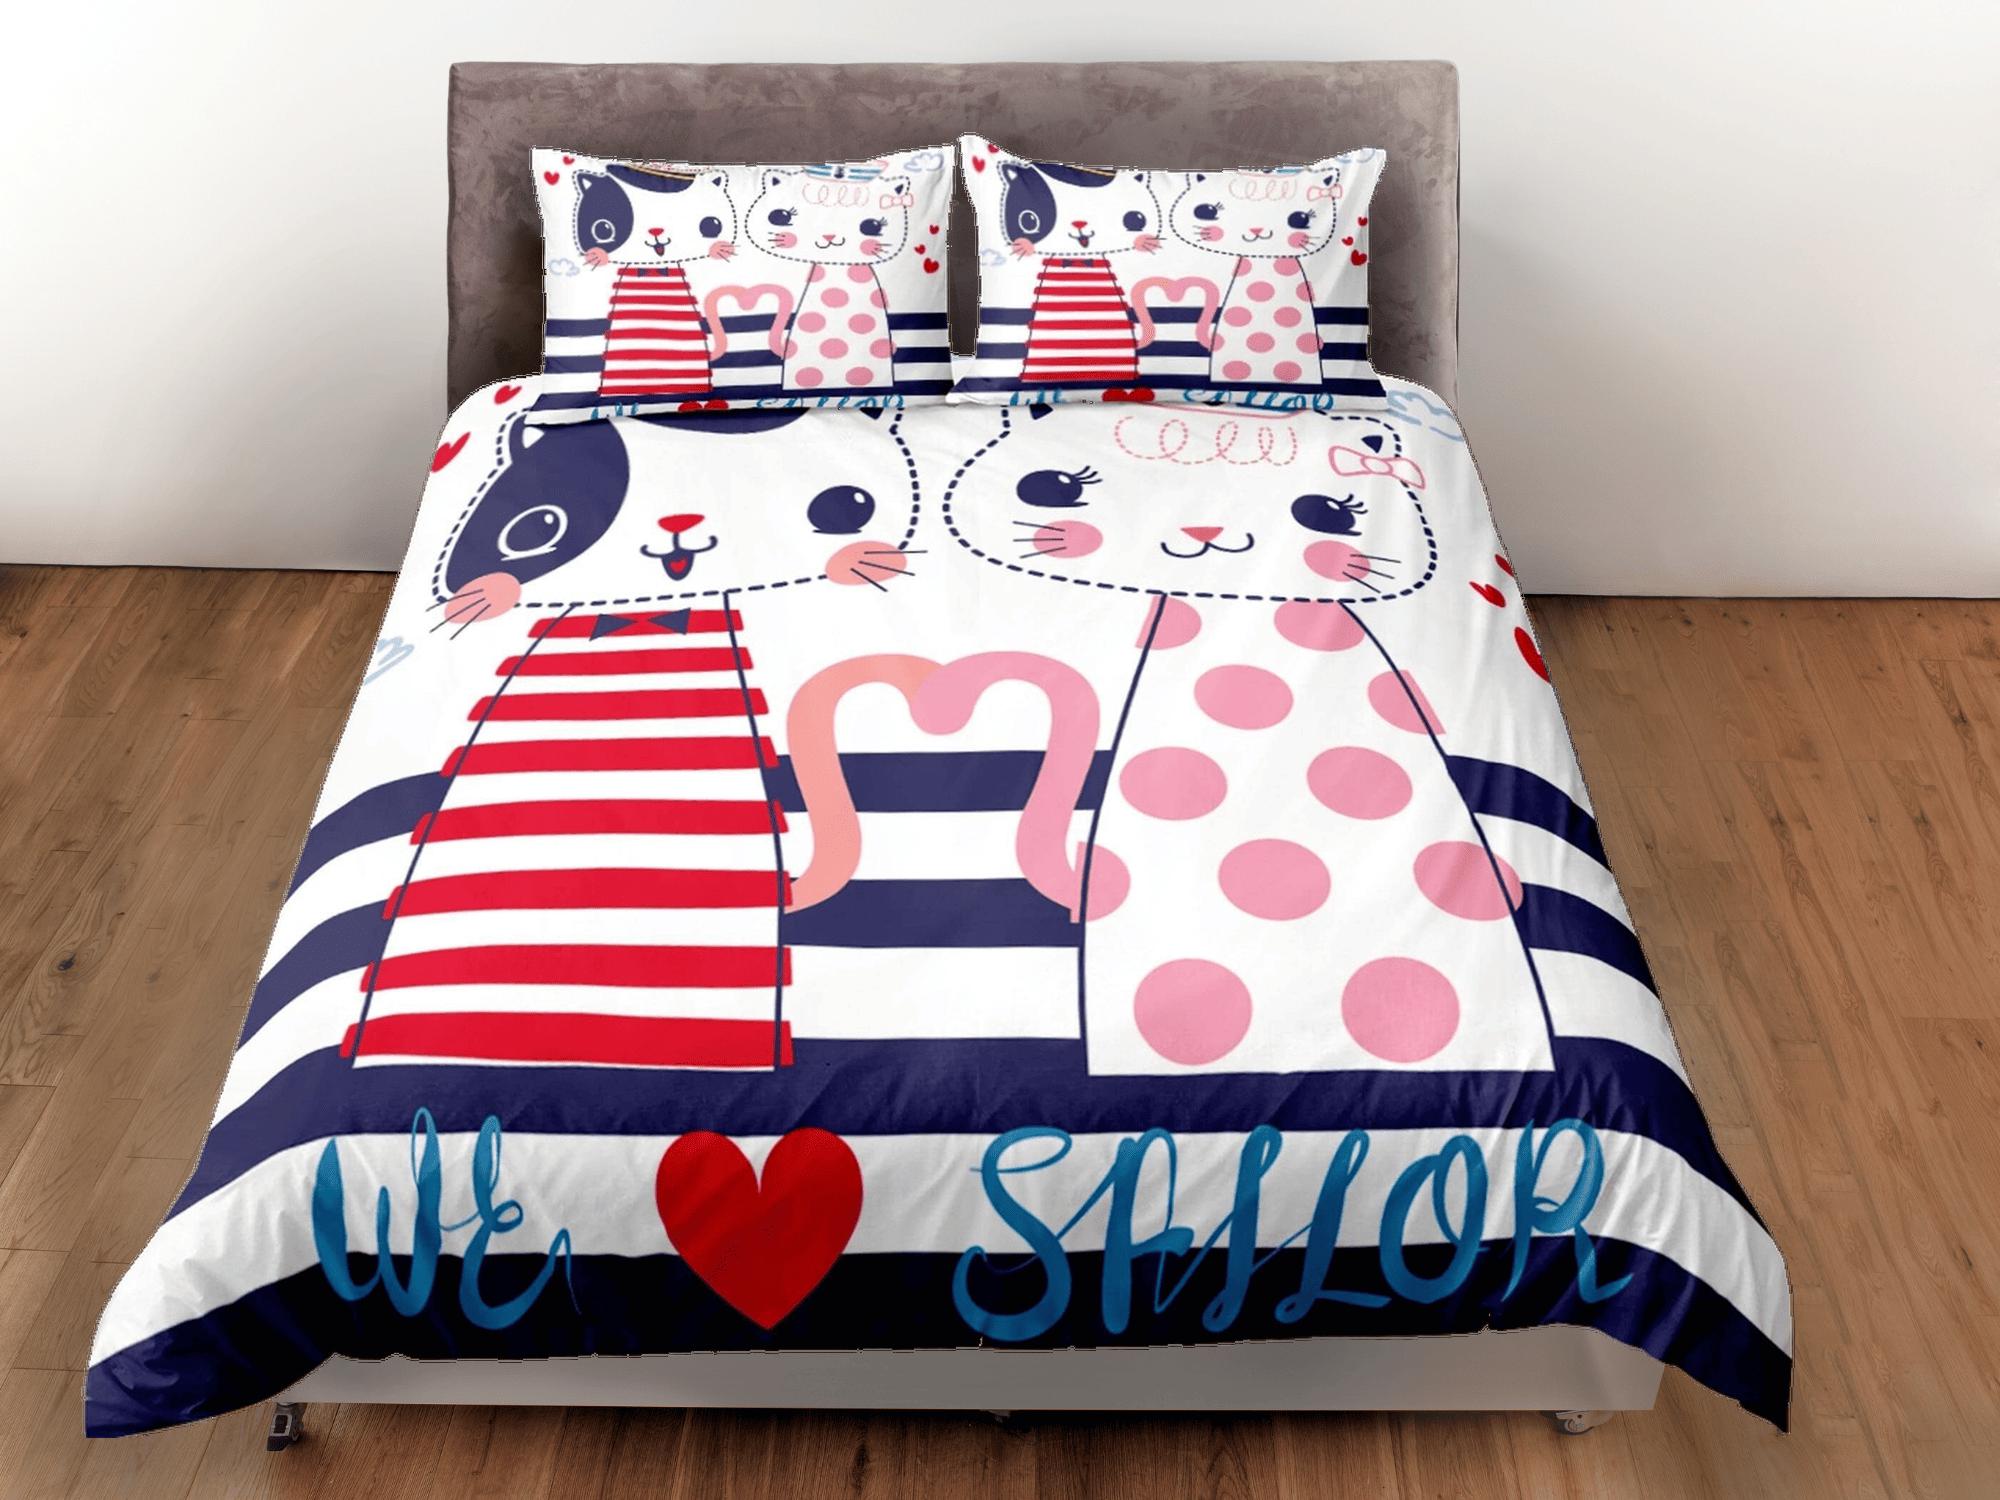 daintyduvet Cute sailor couple cat bedding, toddler bedding, kids duvet cover set, gift for cat lovers, baby bedding, baby shower gift, young couple